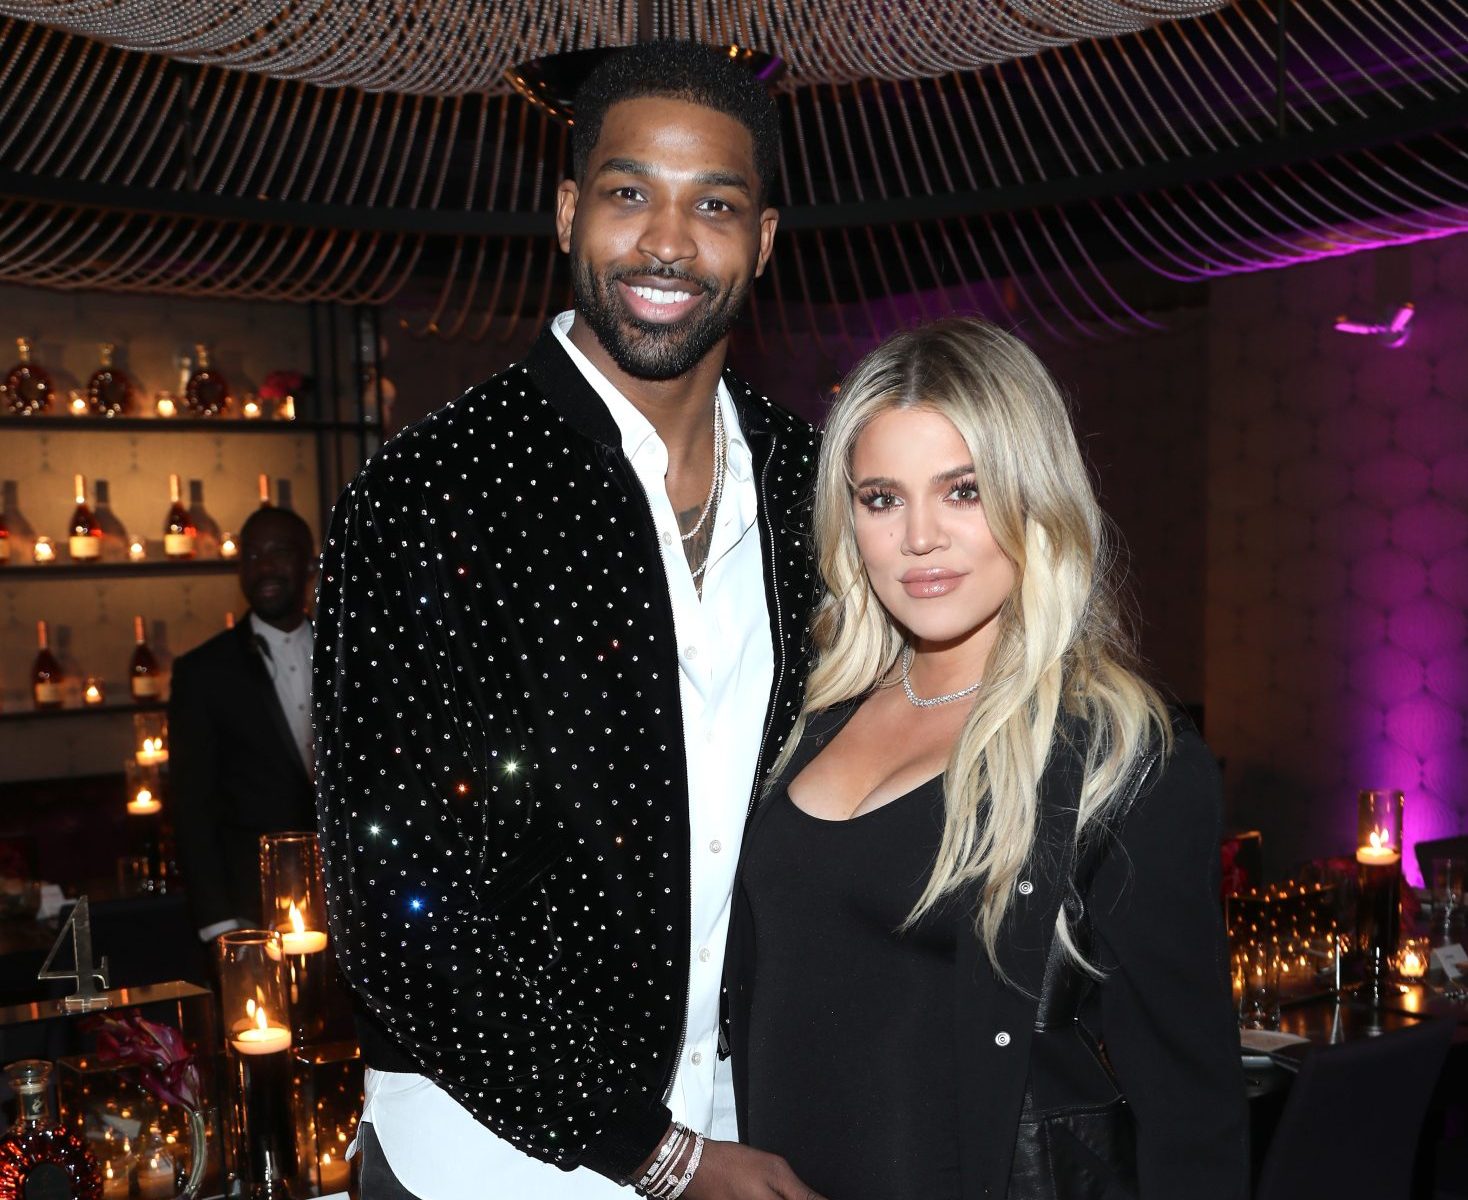 Khloe Kardashian and Tristan Thompson are expecting a second child together, which will be born via surrogate.